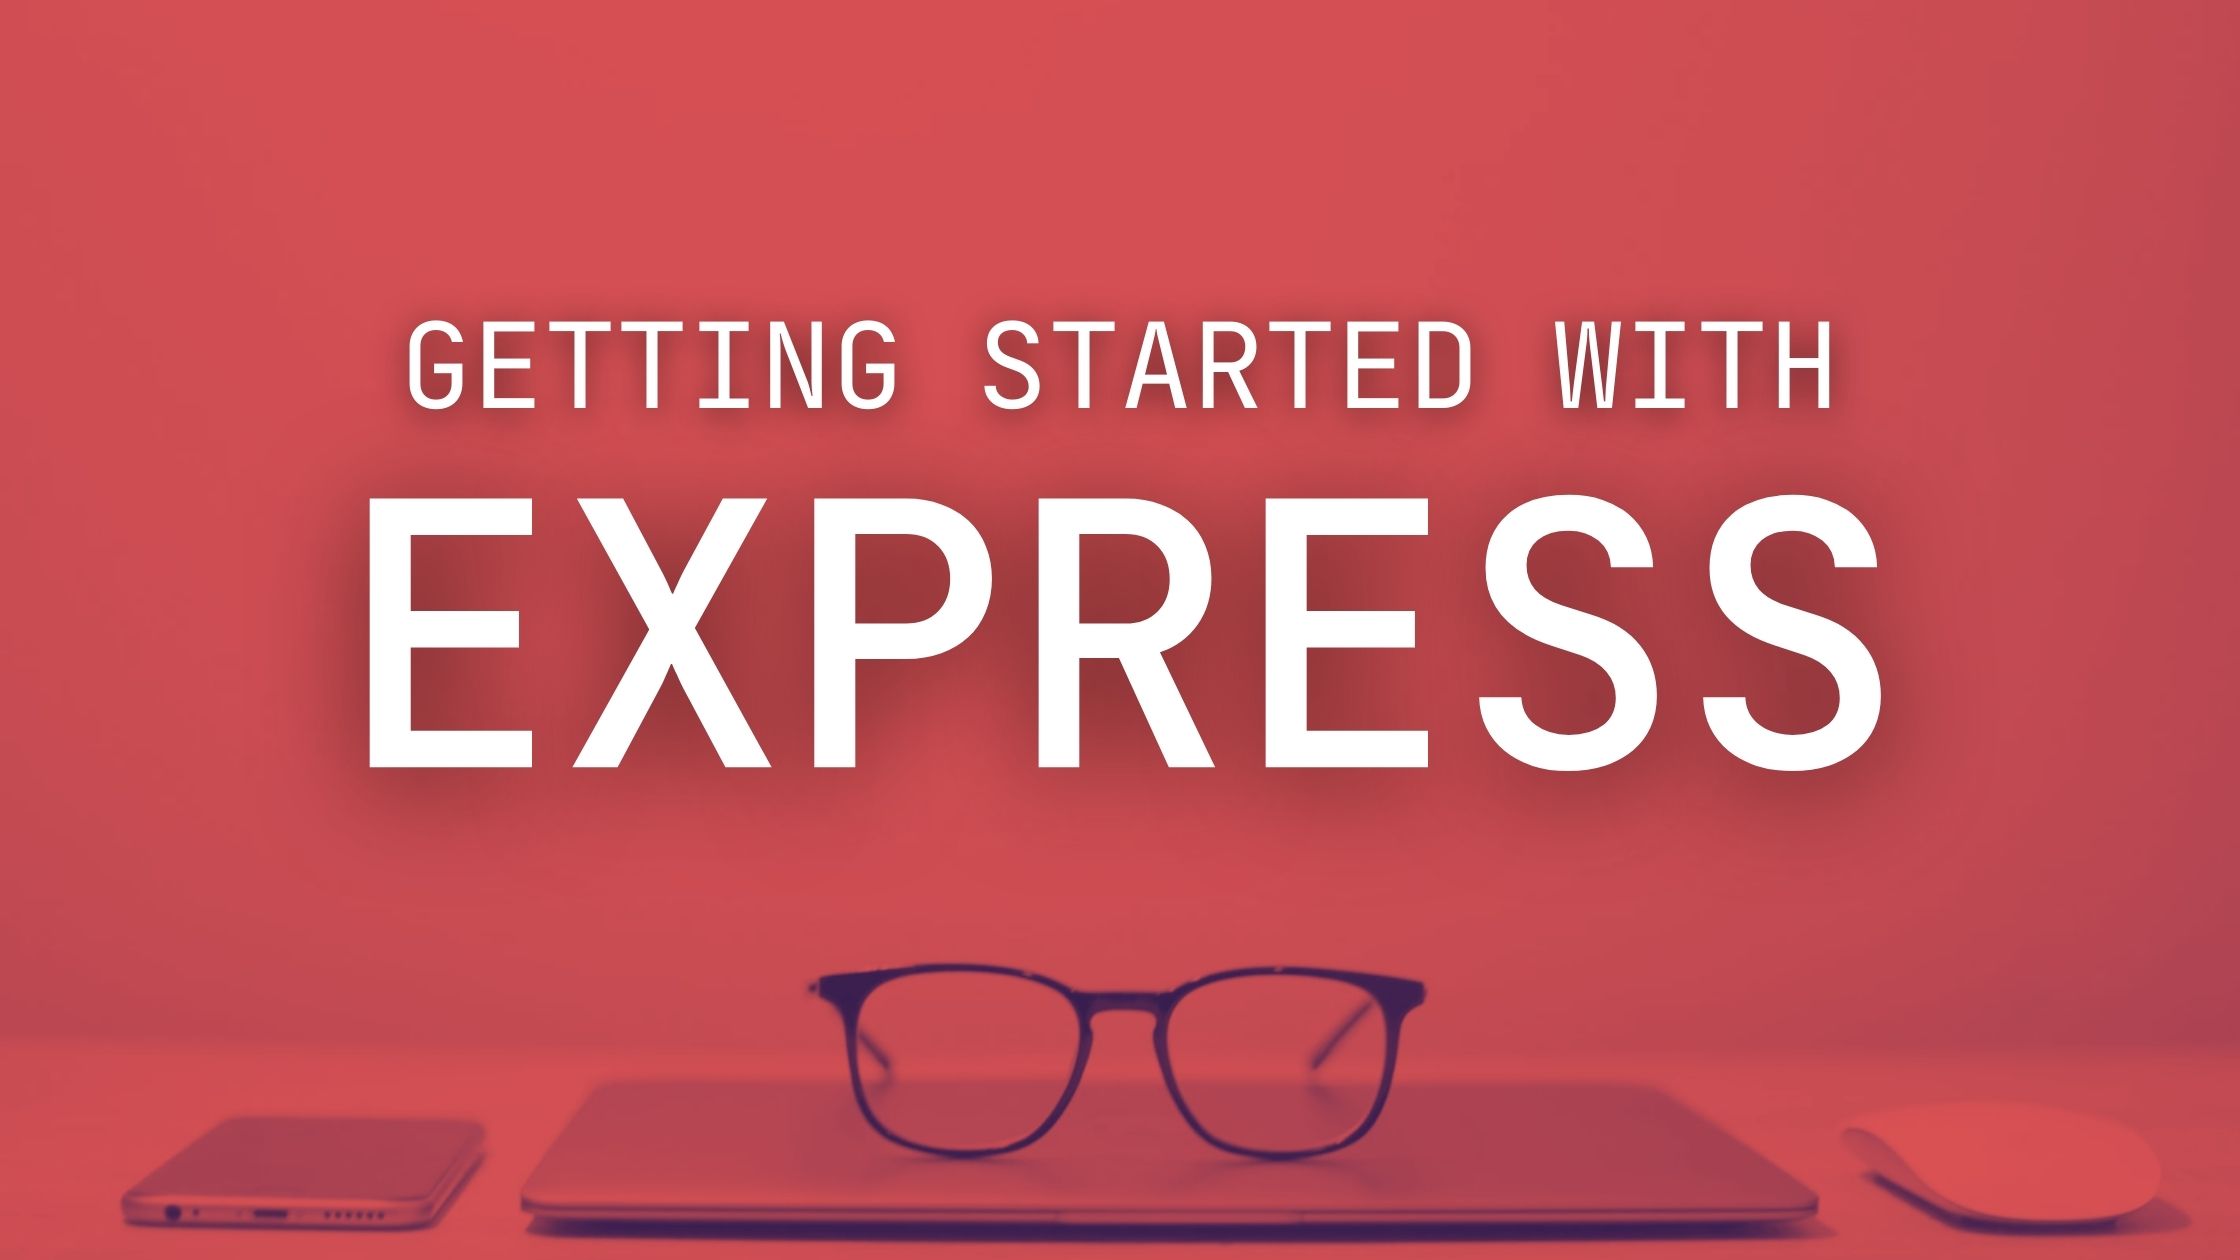 express_started